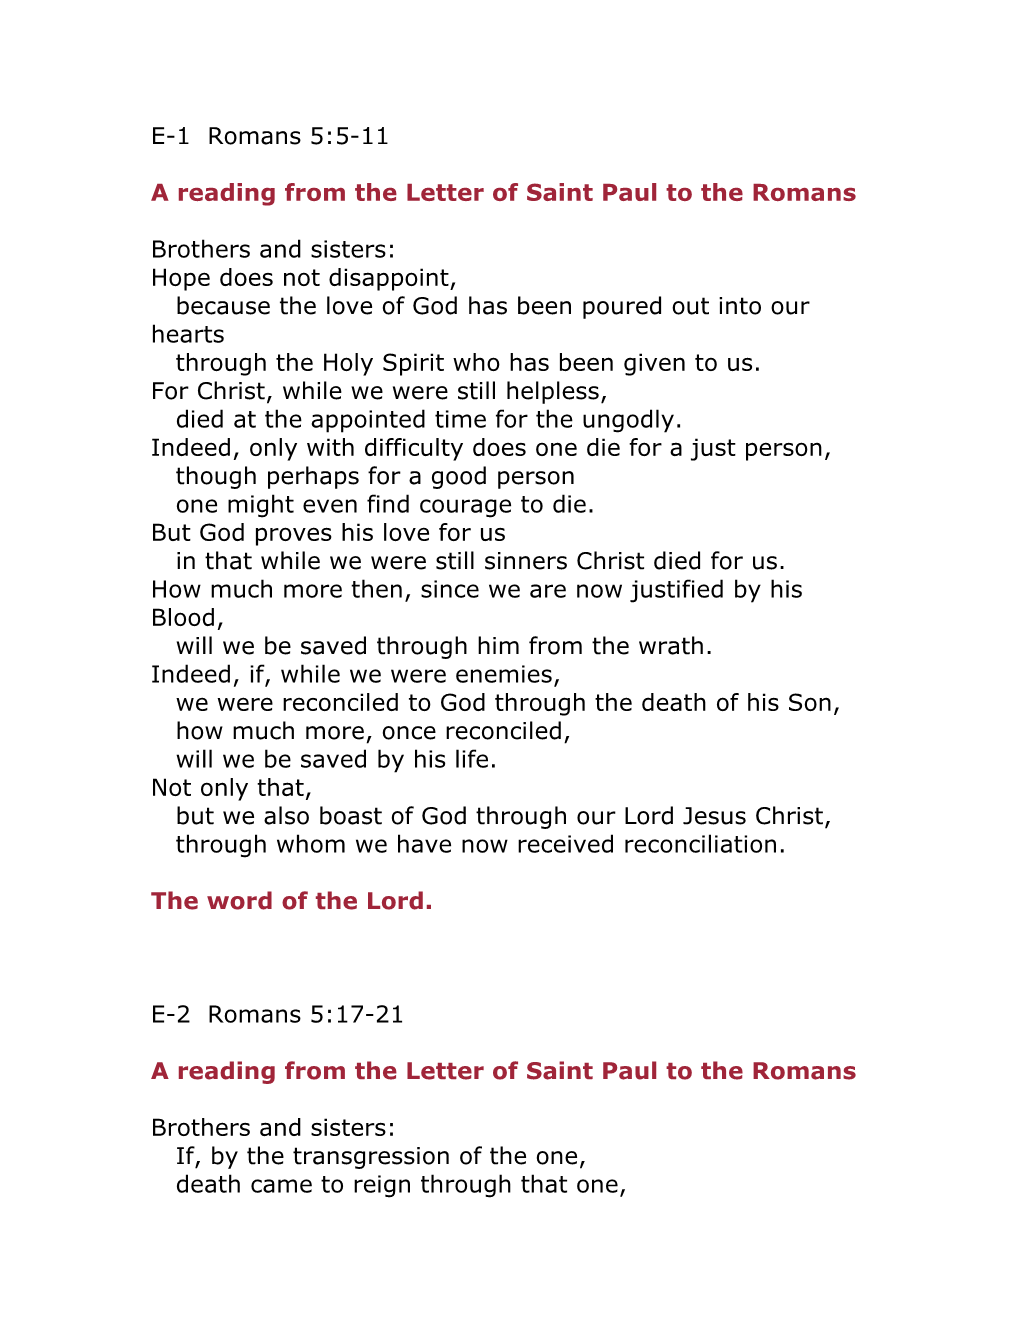 A Reading from the Letter of Saint Paul to the Romans